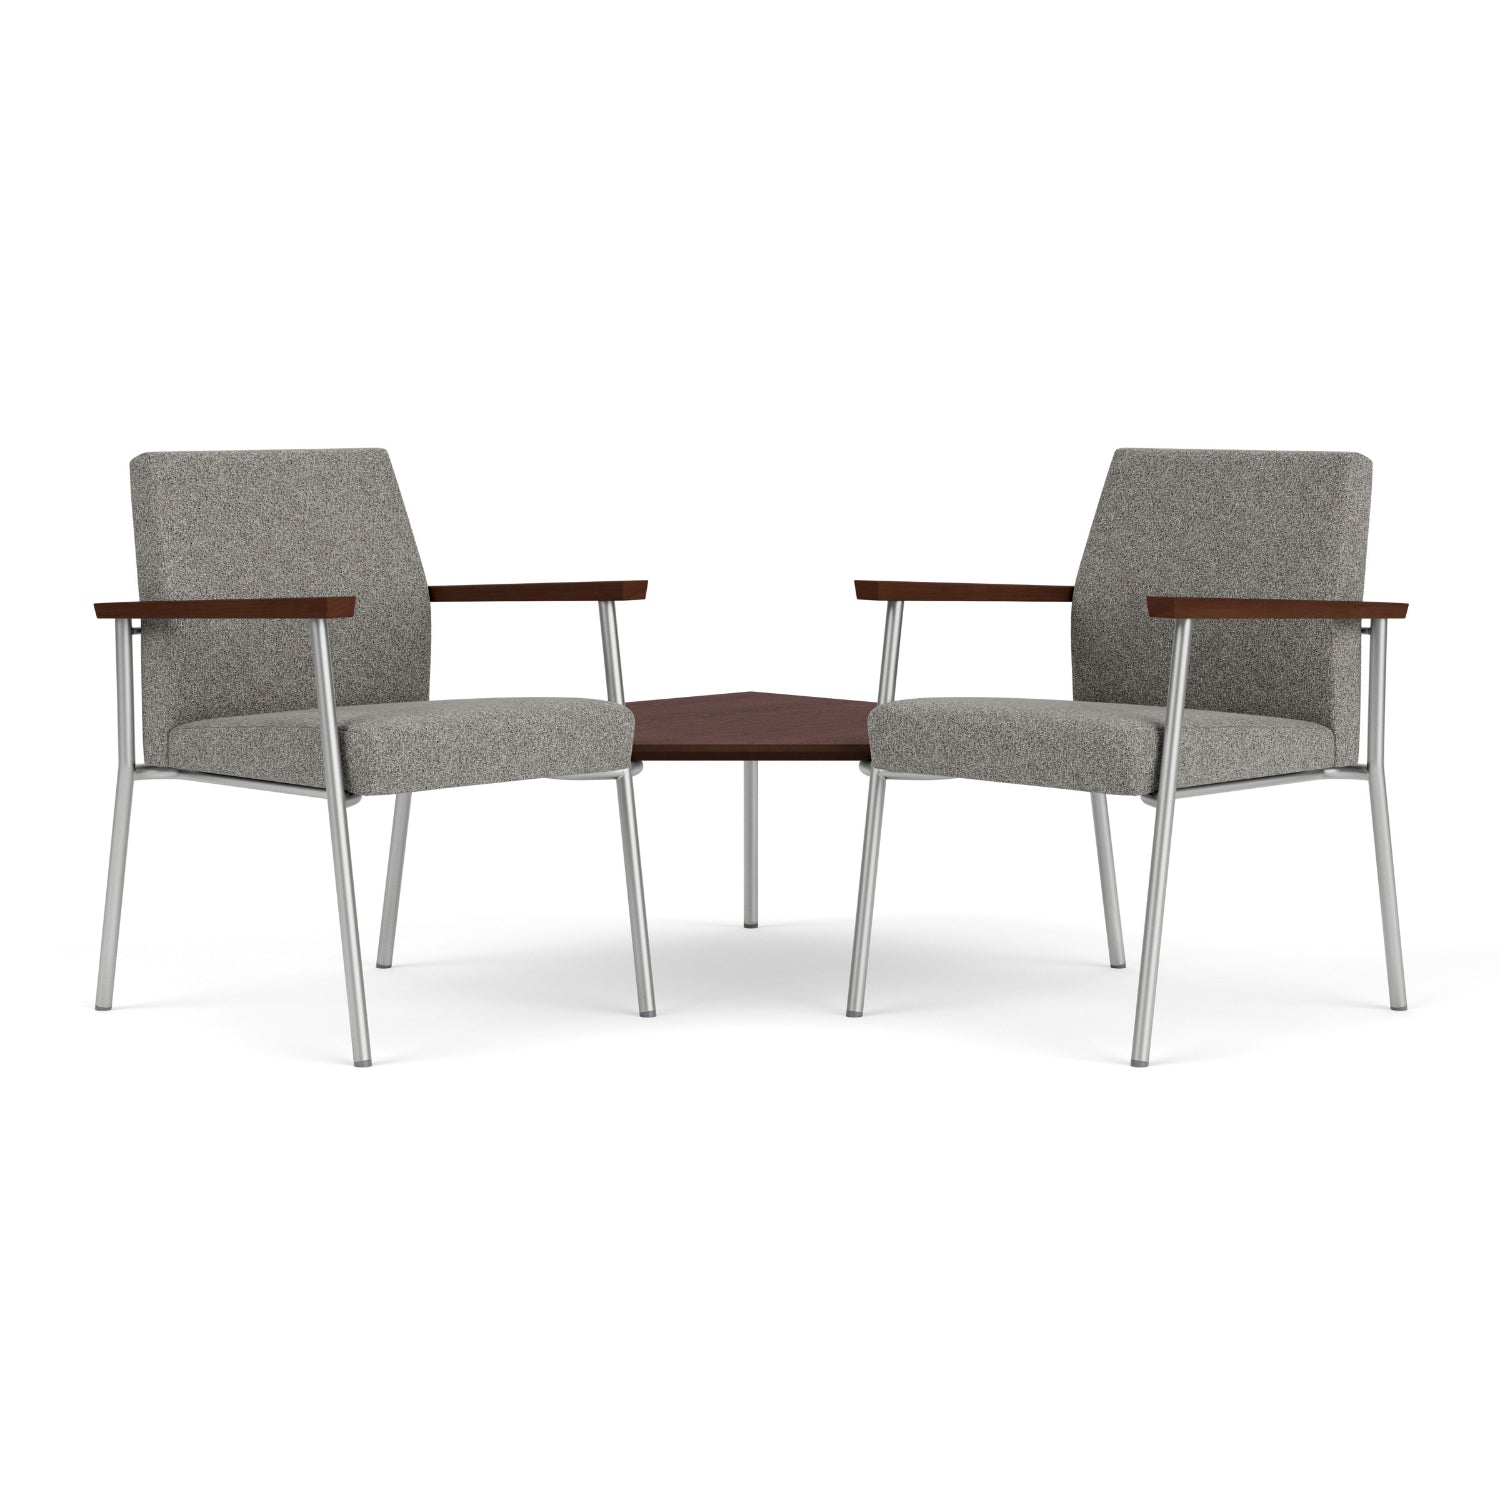 Mystic Guest Collection Reception Seating, 2 Chairs with Connecting Corner Table, Standard Fabric Upholstery, FREE SHIPPING